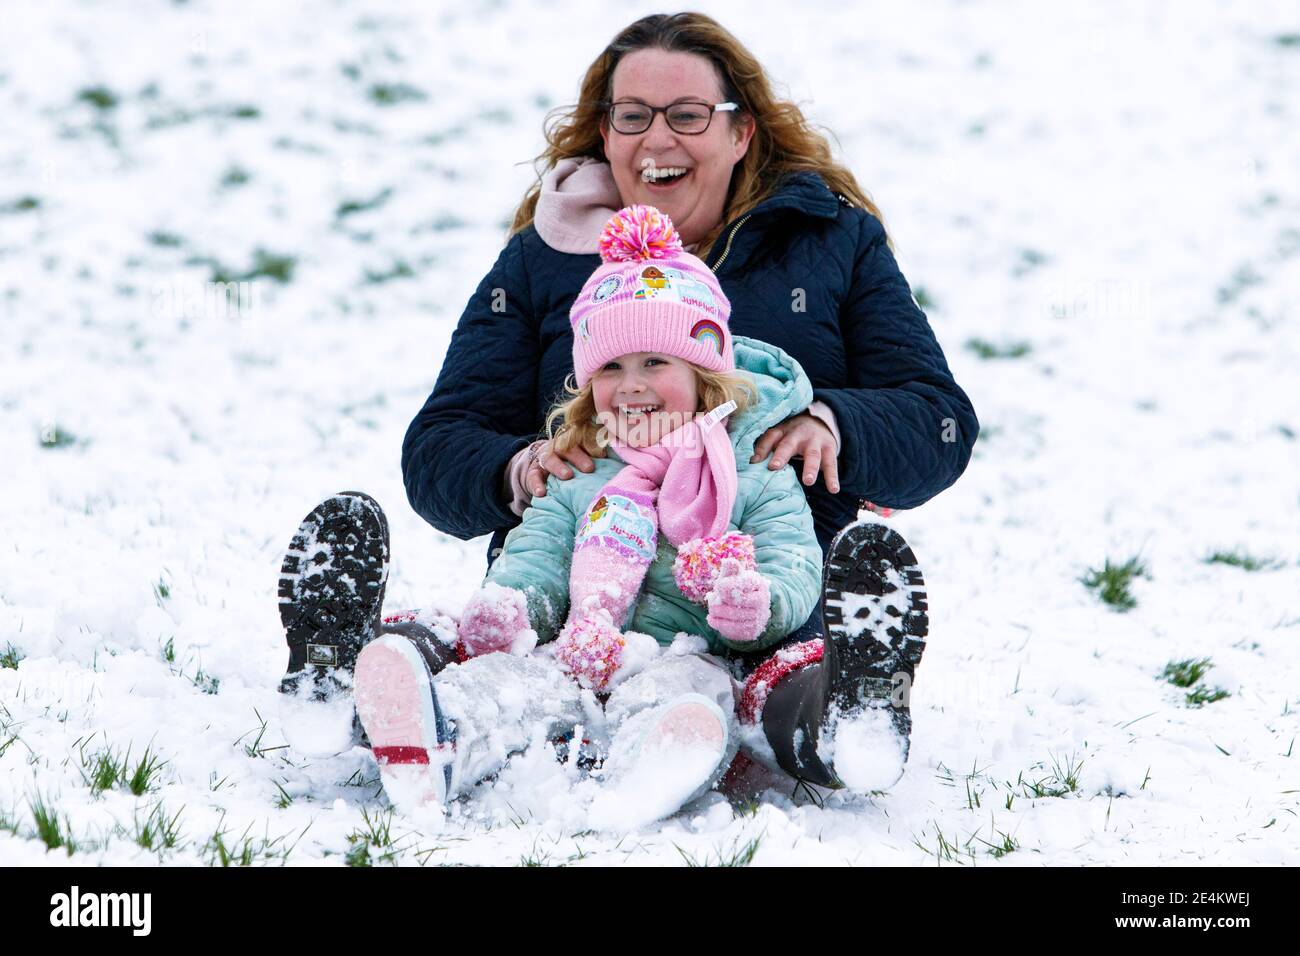 Chippenham, Wiltshire, UK. 24th January, 2021. As Chippenham residents wake up to their first snow of the year, a woman and a child are pictured in a local park in Chippenham as they slide down a hill on a sledge. Credit: Lynchpics/Alamy Live News Stock Photo